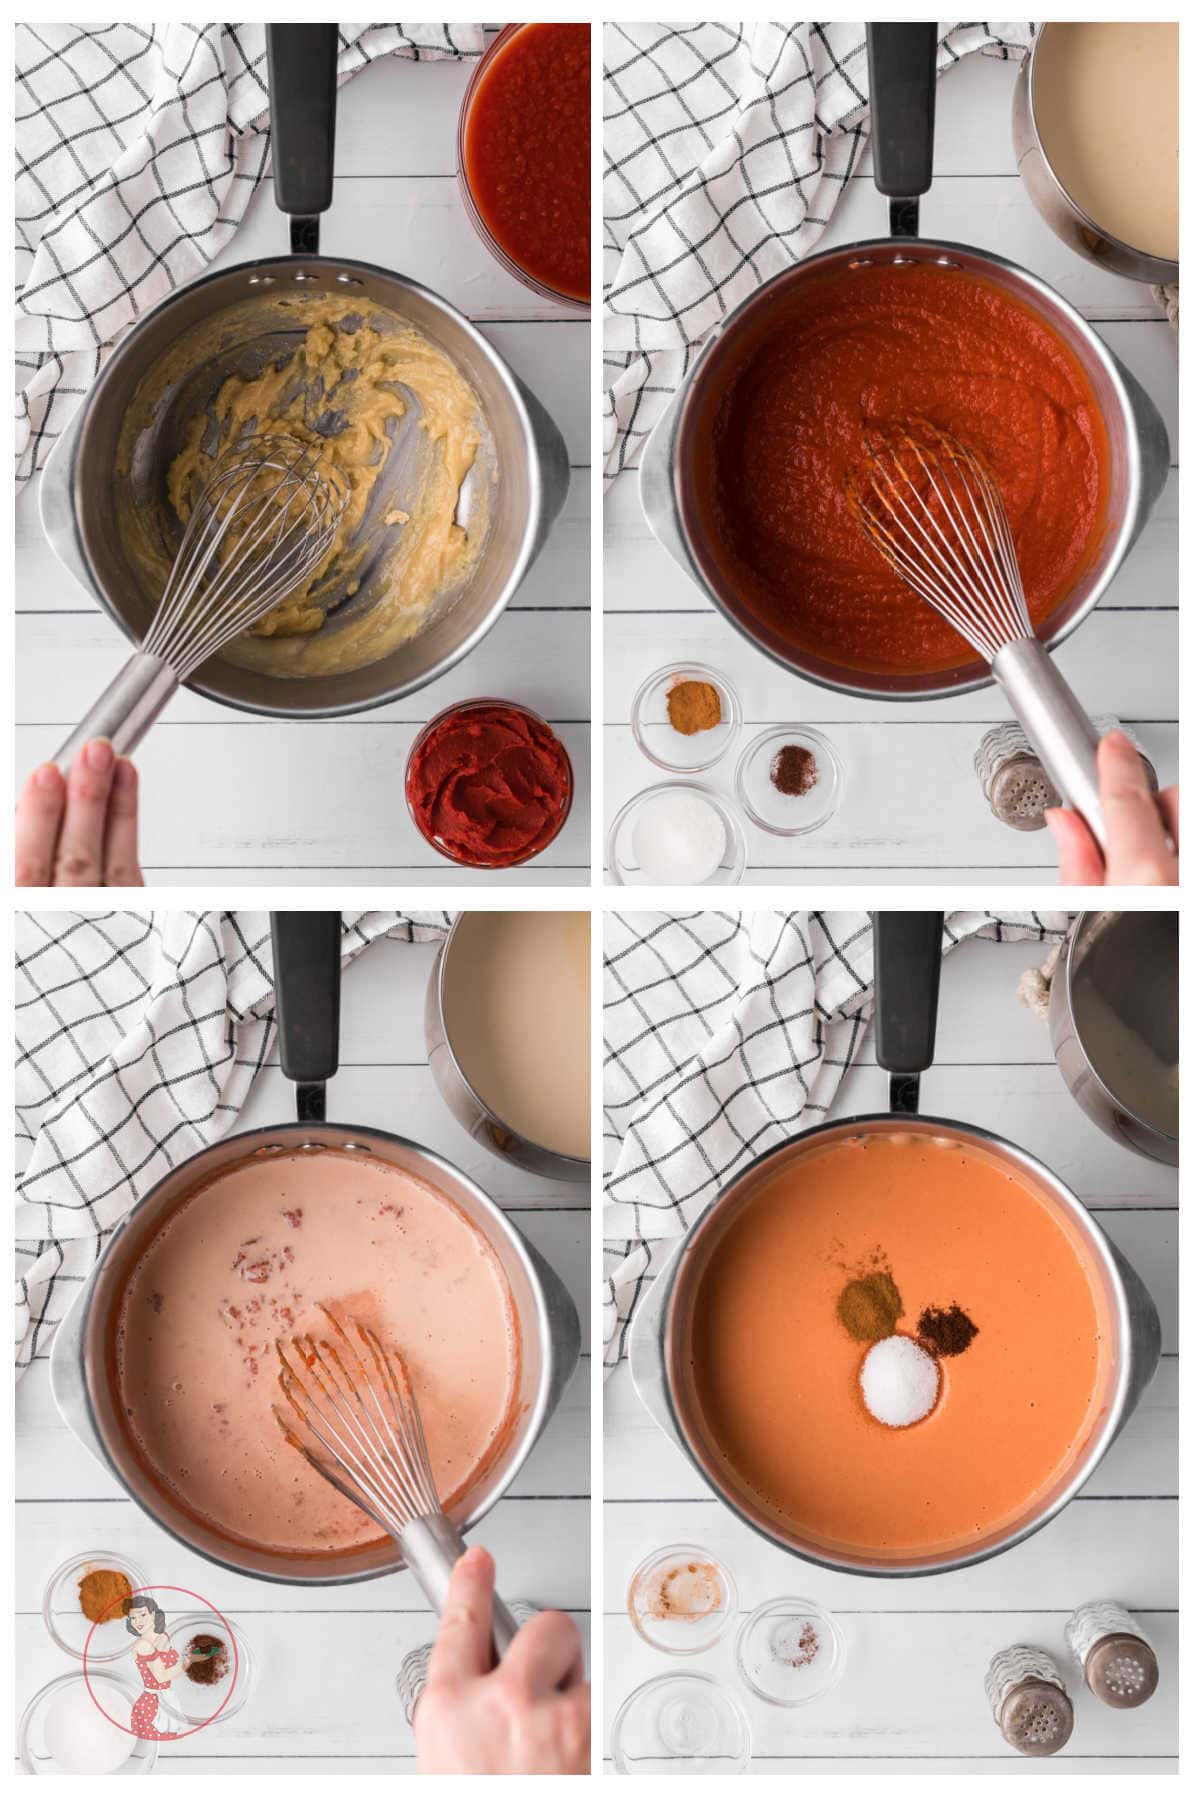 Step by step images showing how to make tomato soup.